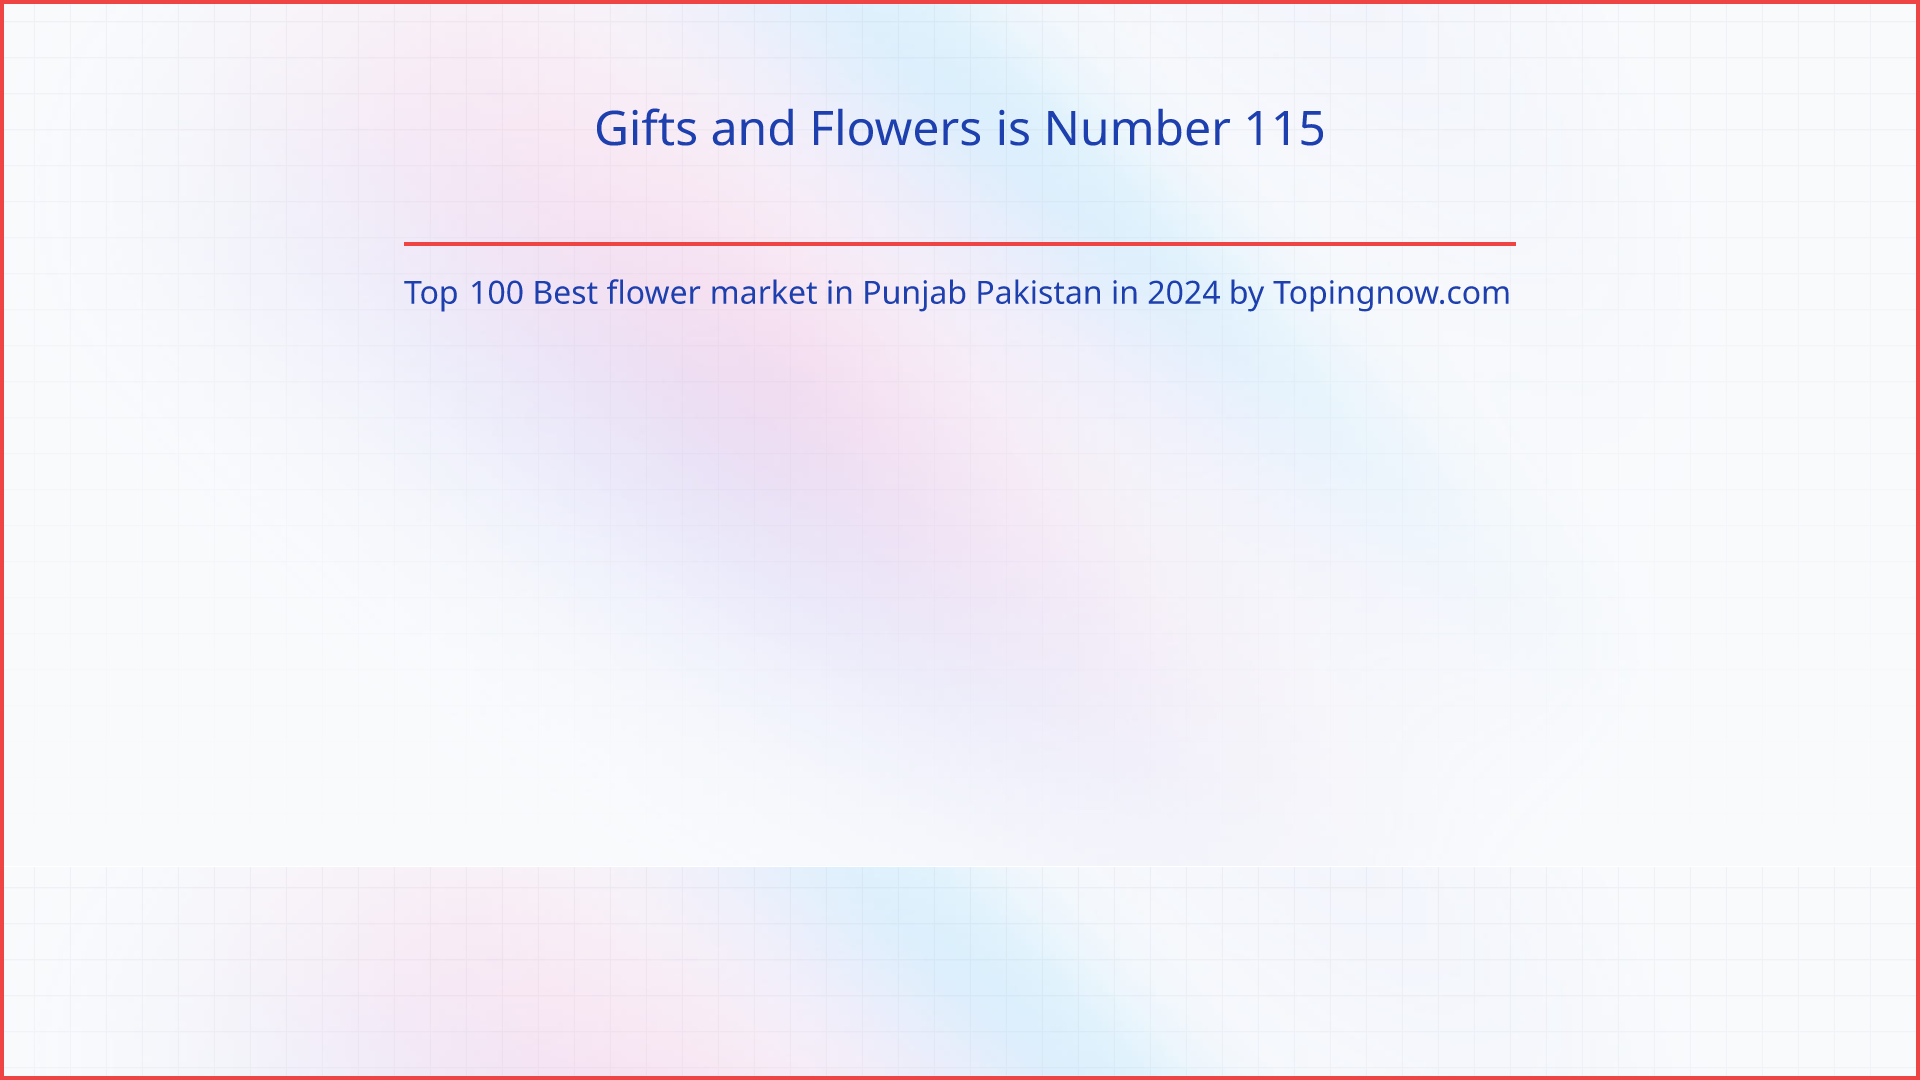 Gifts and Flowers: Top 100 Best flower market in Punjab Pakistan in 2024